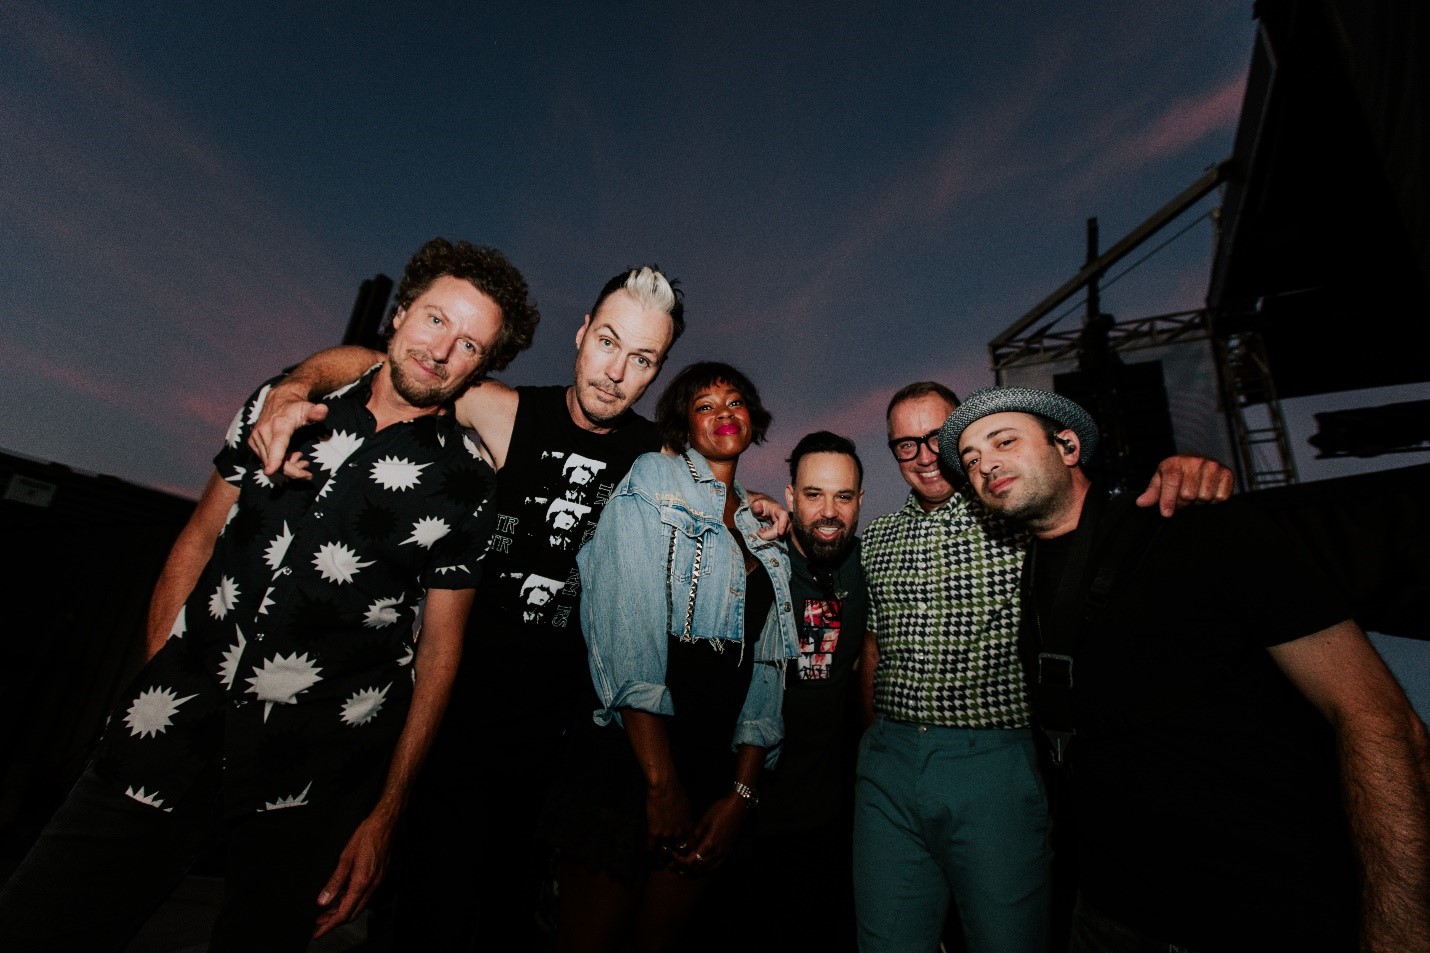 Fitz and the Tantrums (pictured) and St.  Paul & the Broken Bones share the stage for a night of modern soul music at Fraz Pavilion in Kettering on Friday, June 17.